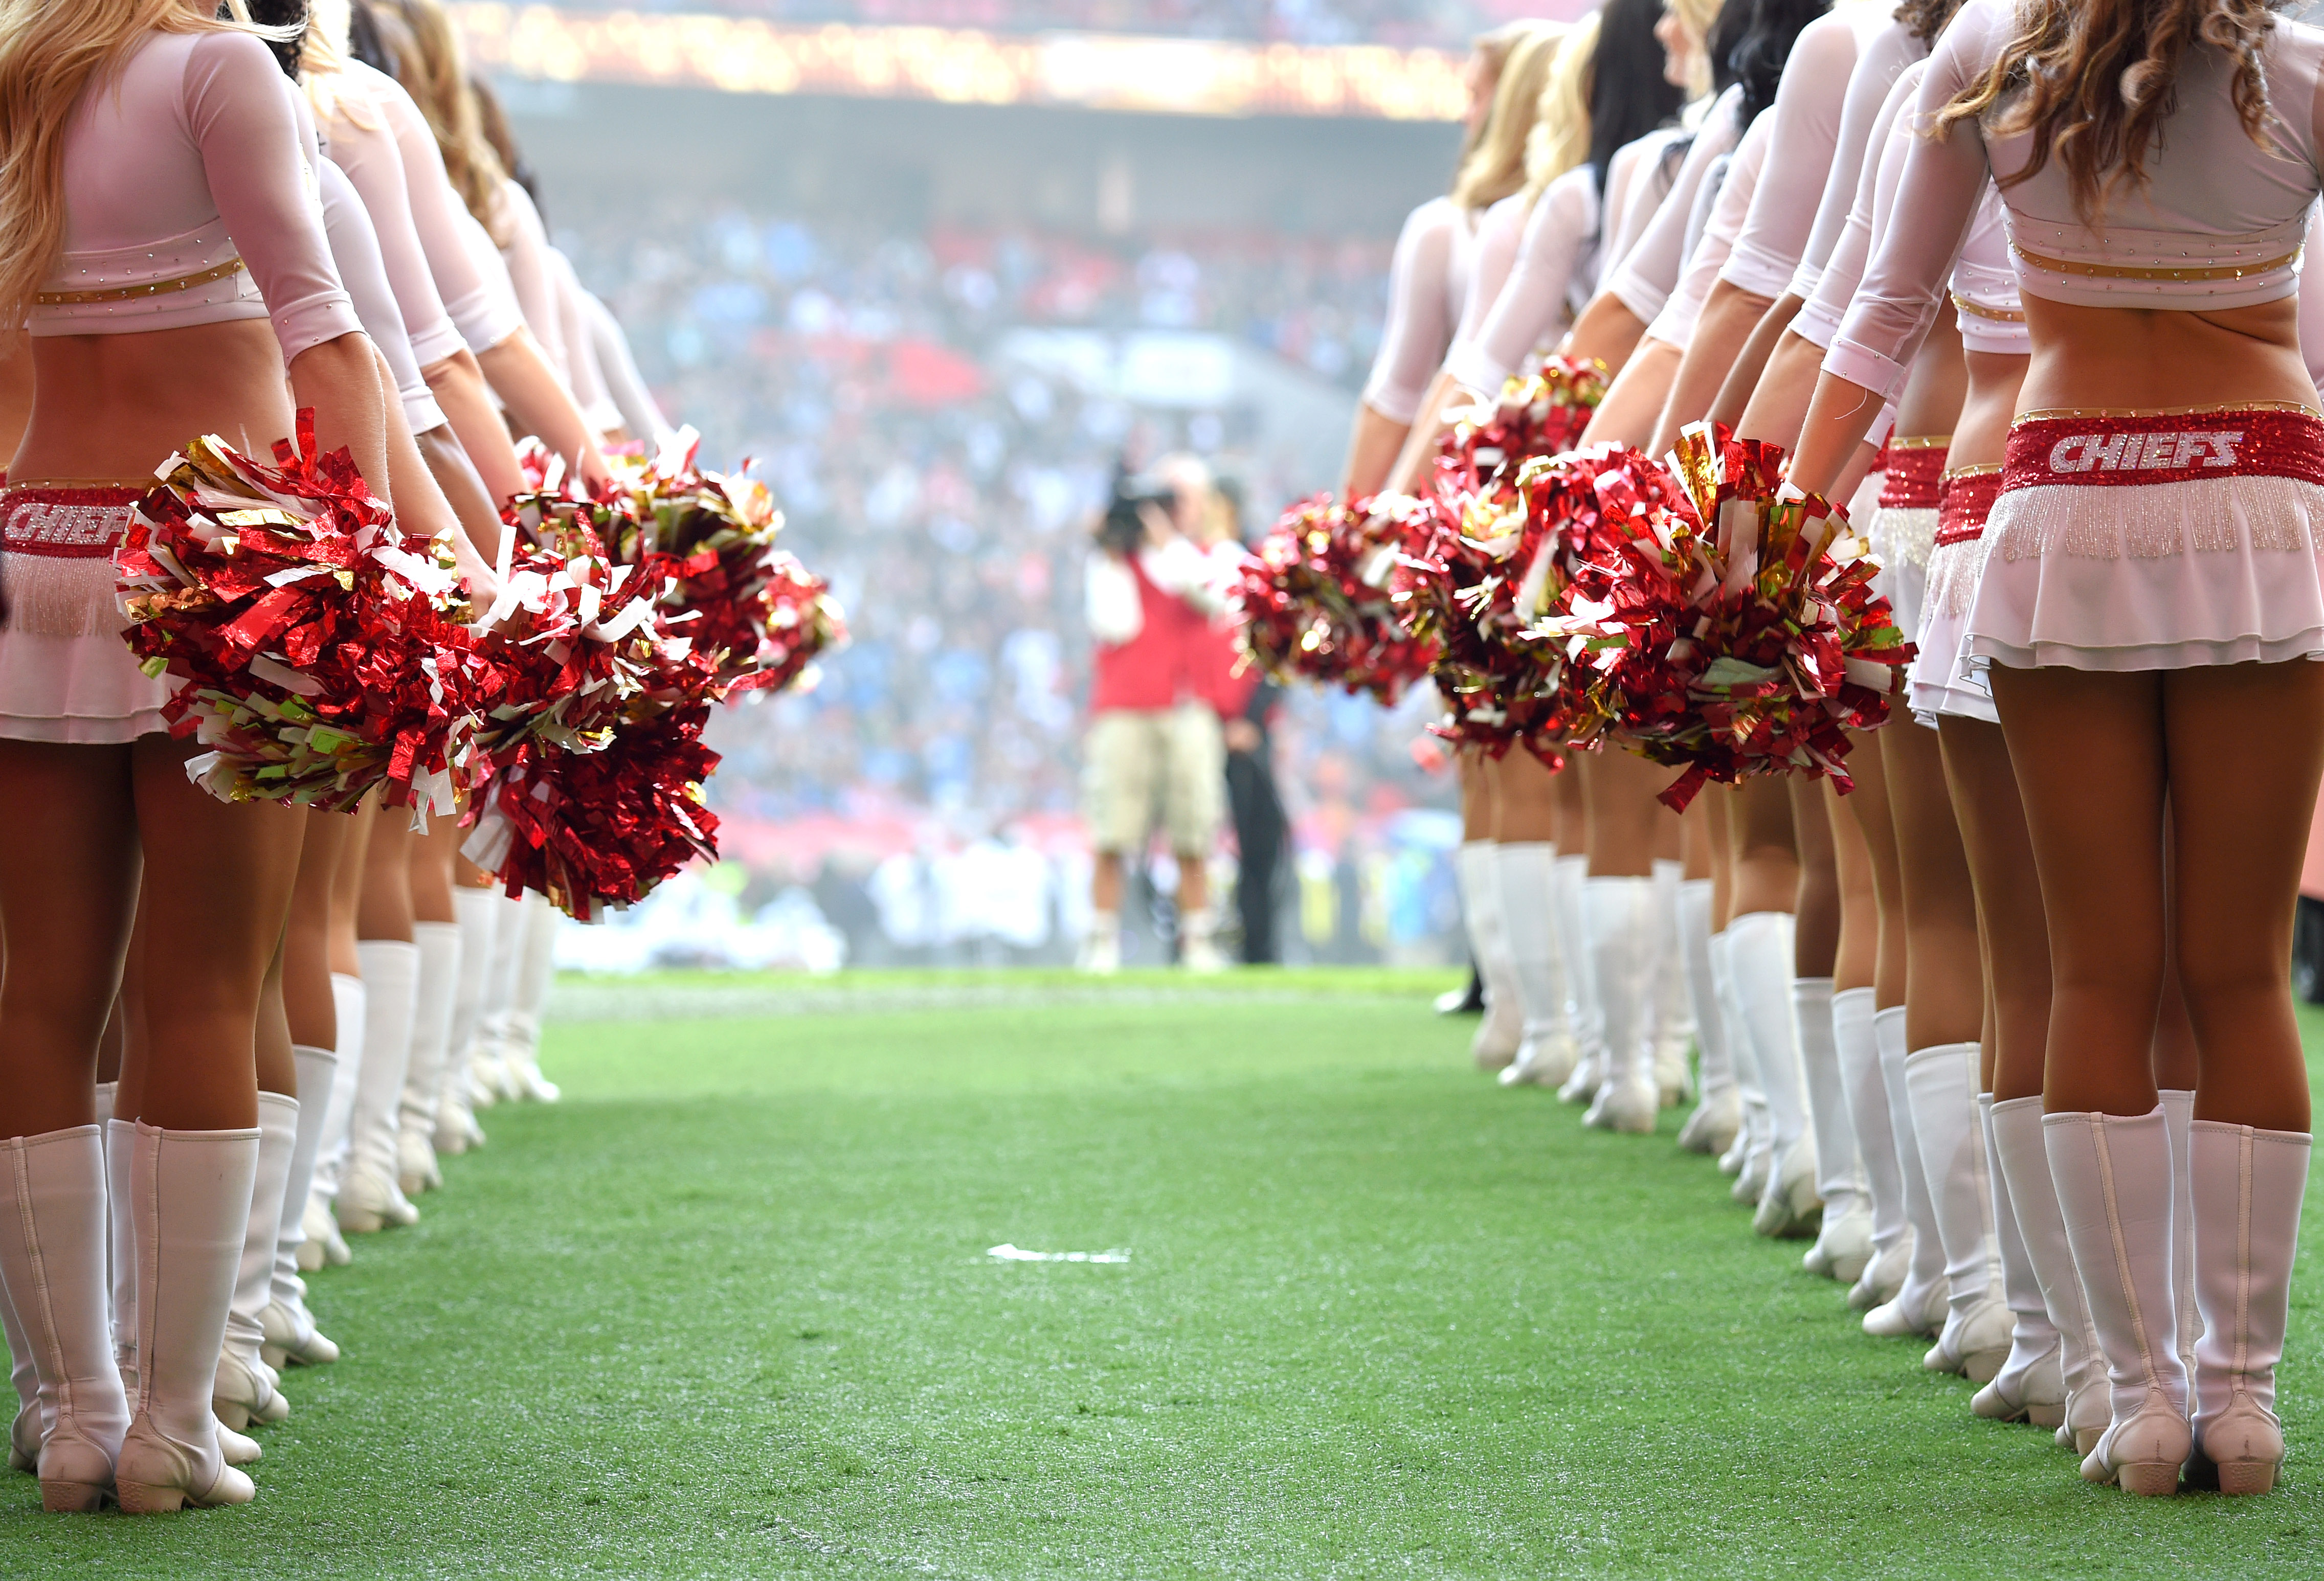 Former NFL Cheerleader Died After a Stillbirth. Now Her Family Is Pushing for Change